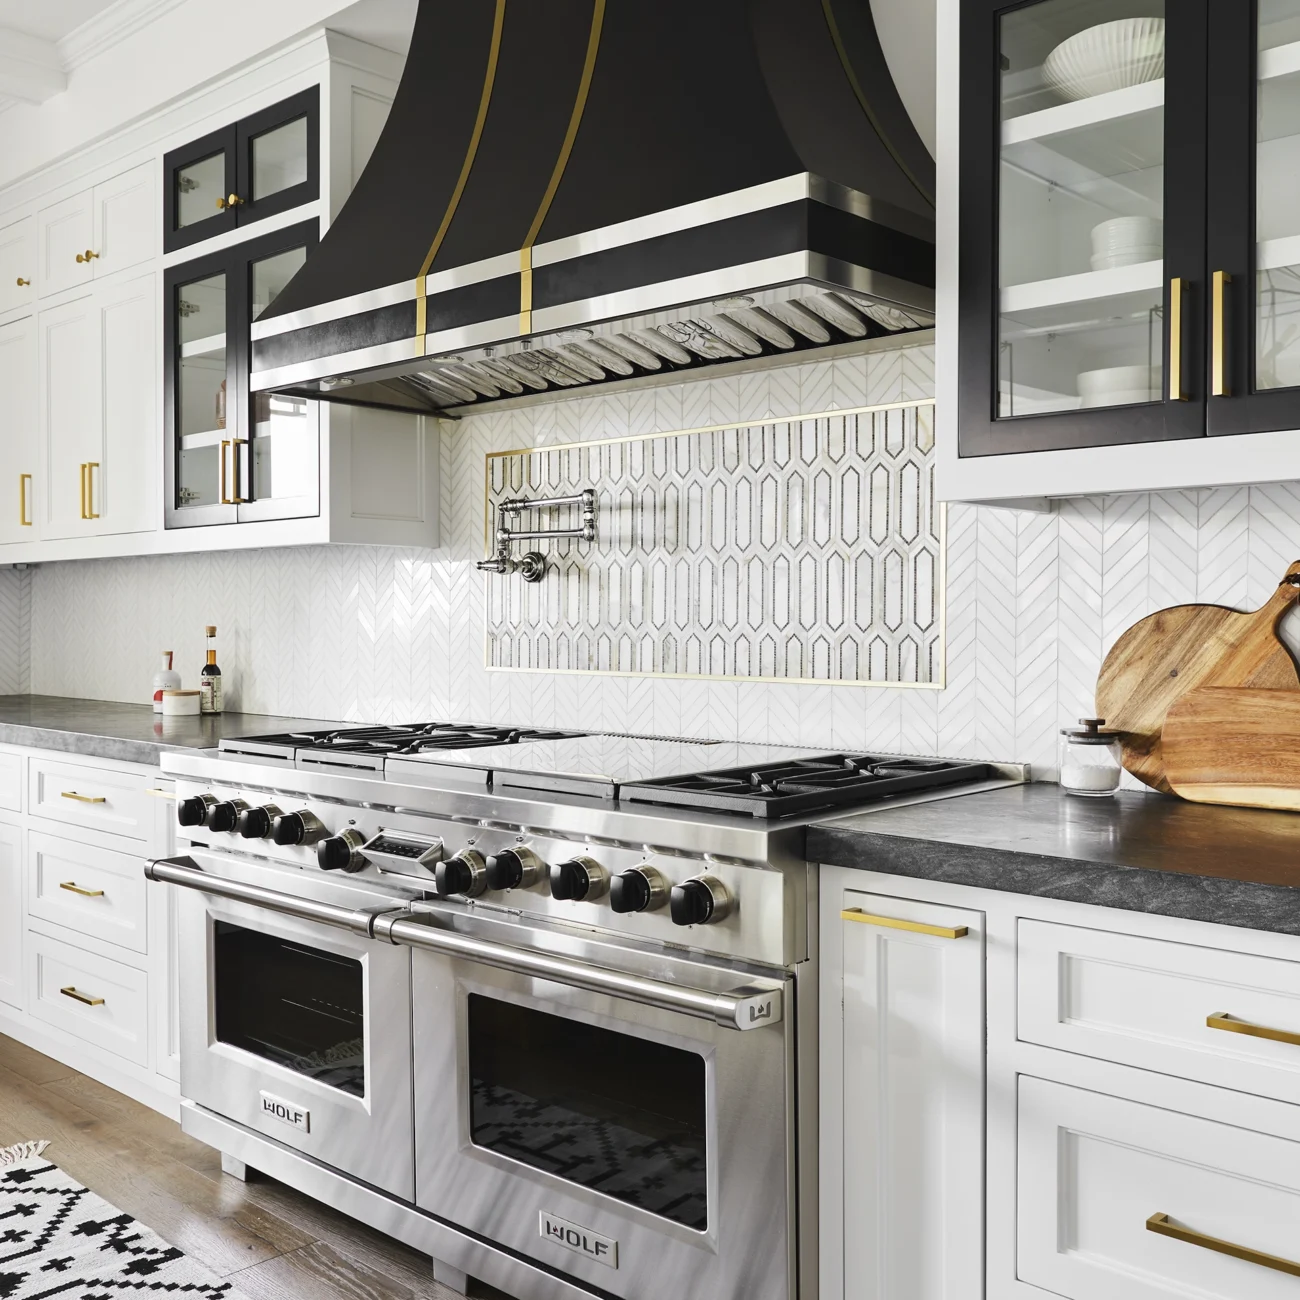 Christine Vroom-Interiors Thayer | Traditional white kitchen with black stove hood, gold accents and chairs